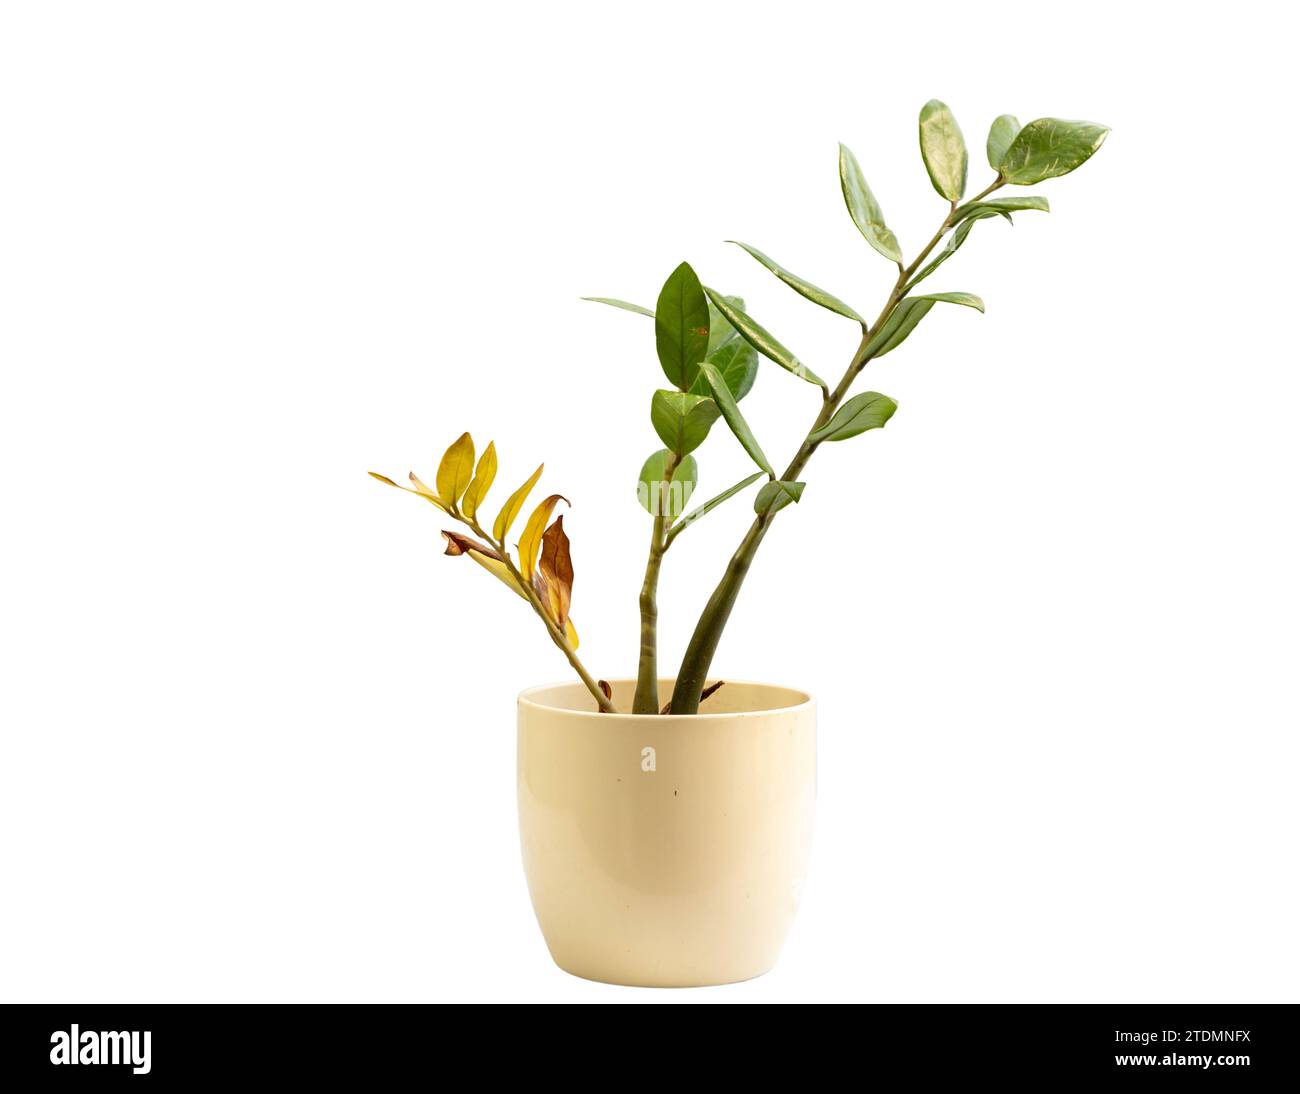 Zamioculcas zamifolia plant with dry leaves isolated on white background Stock Photo